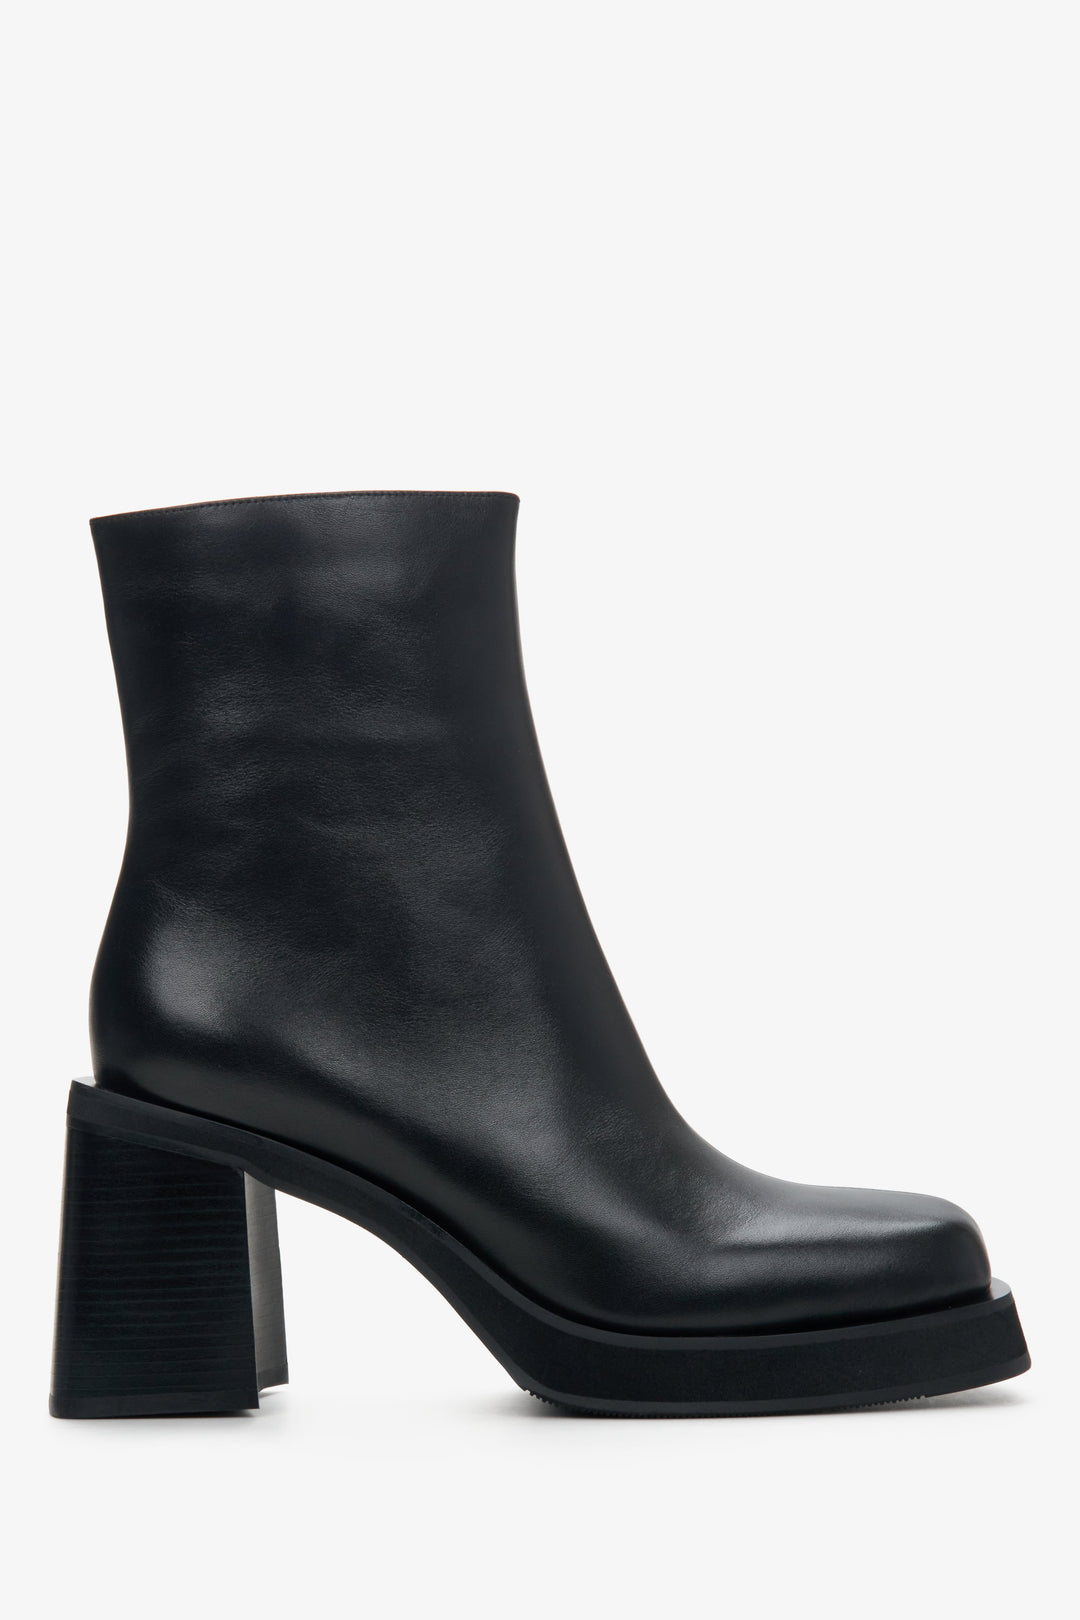 Women's Black Leather Boots on a Stable Platform and Heel Estro ER00114235.